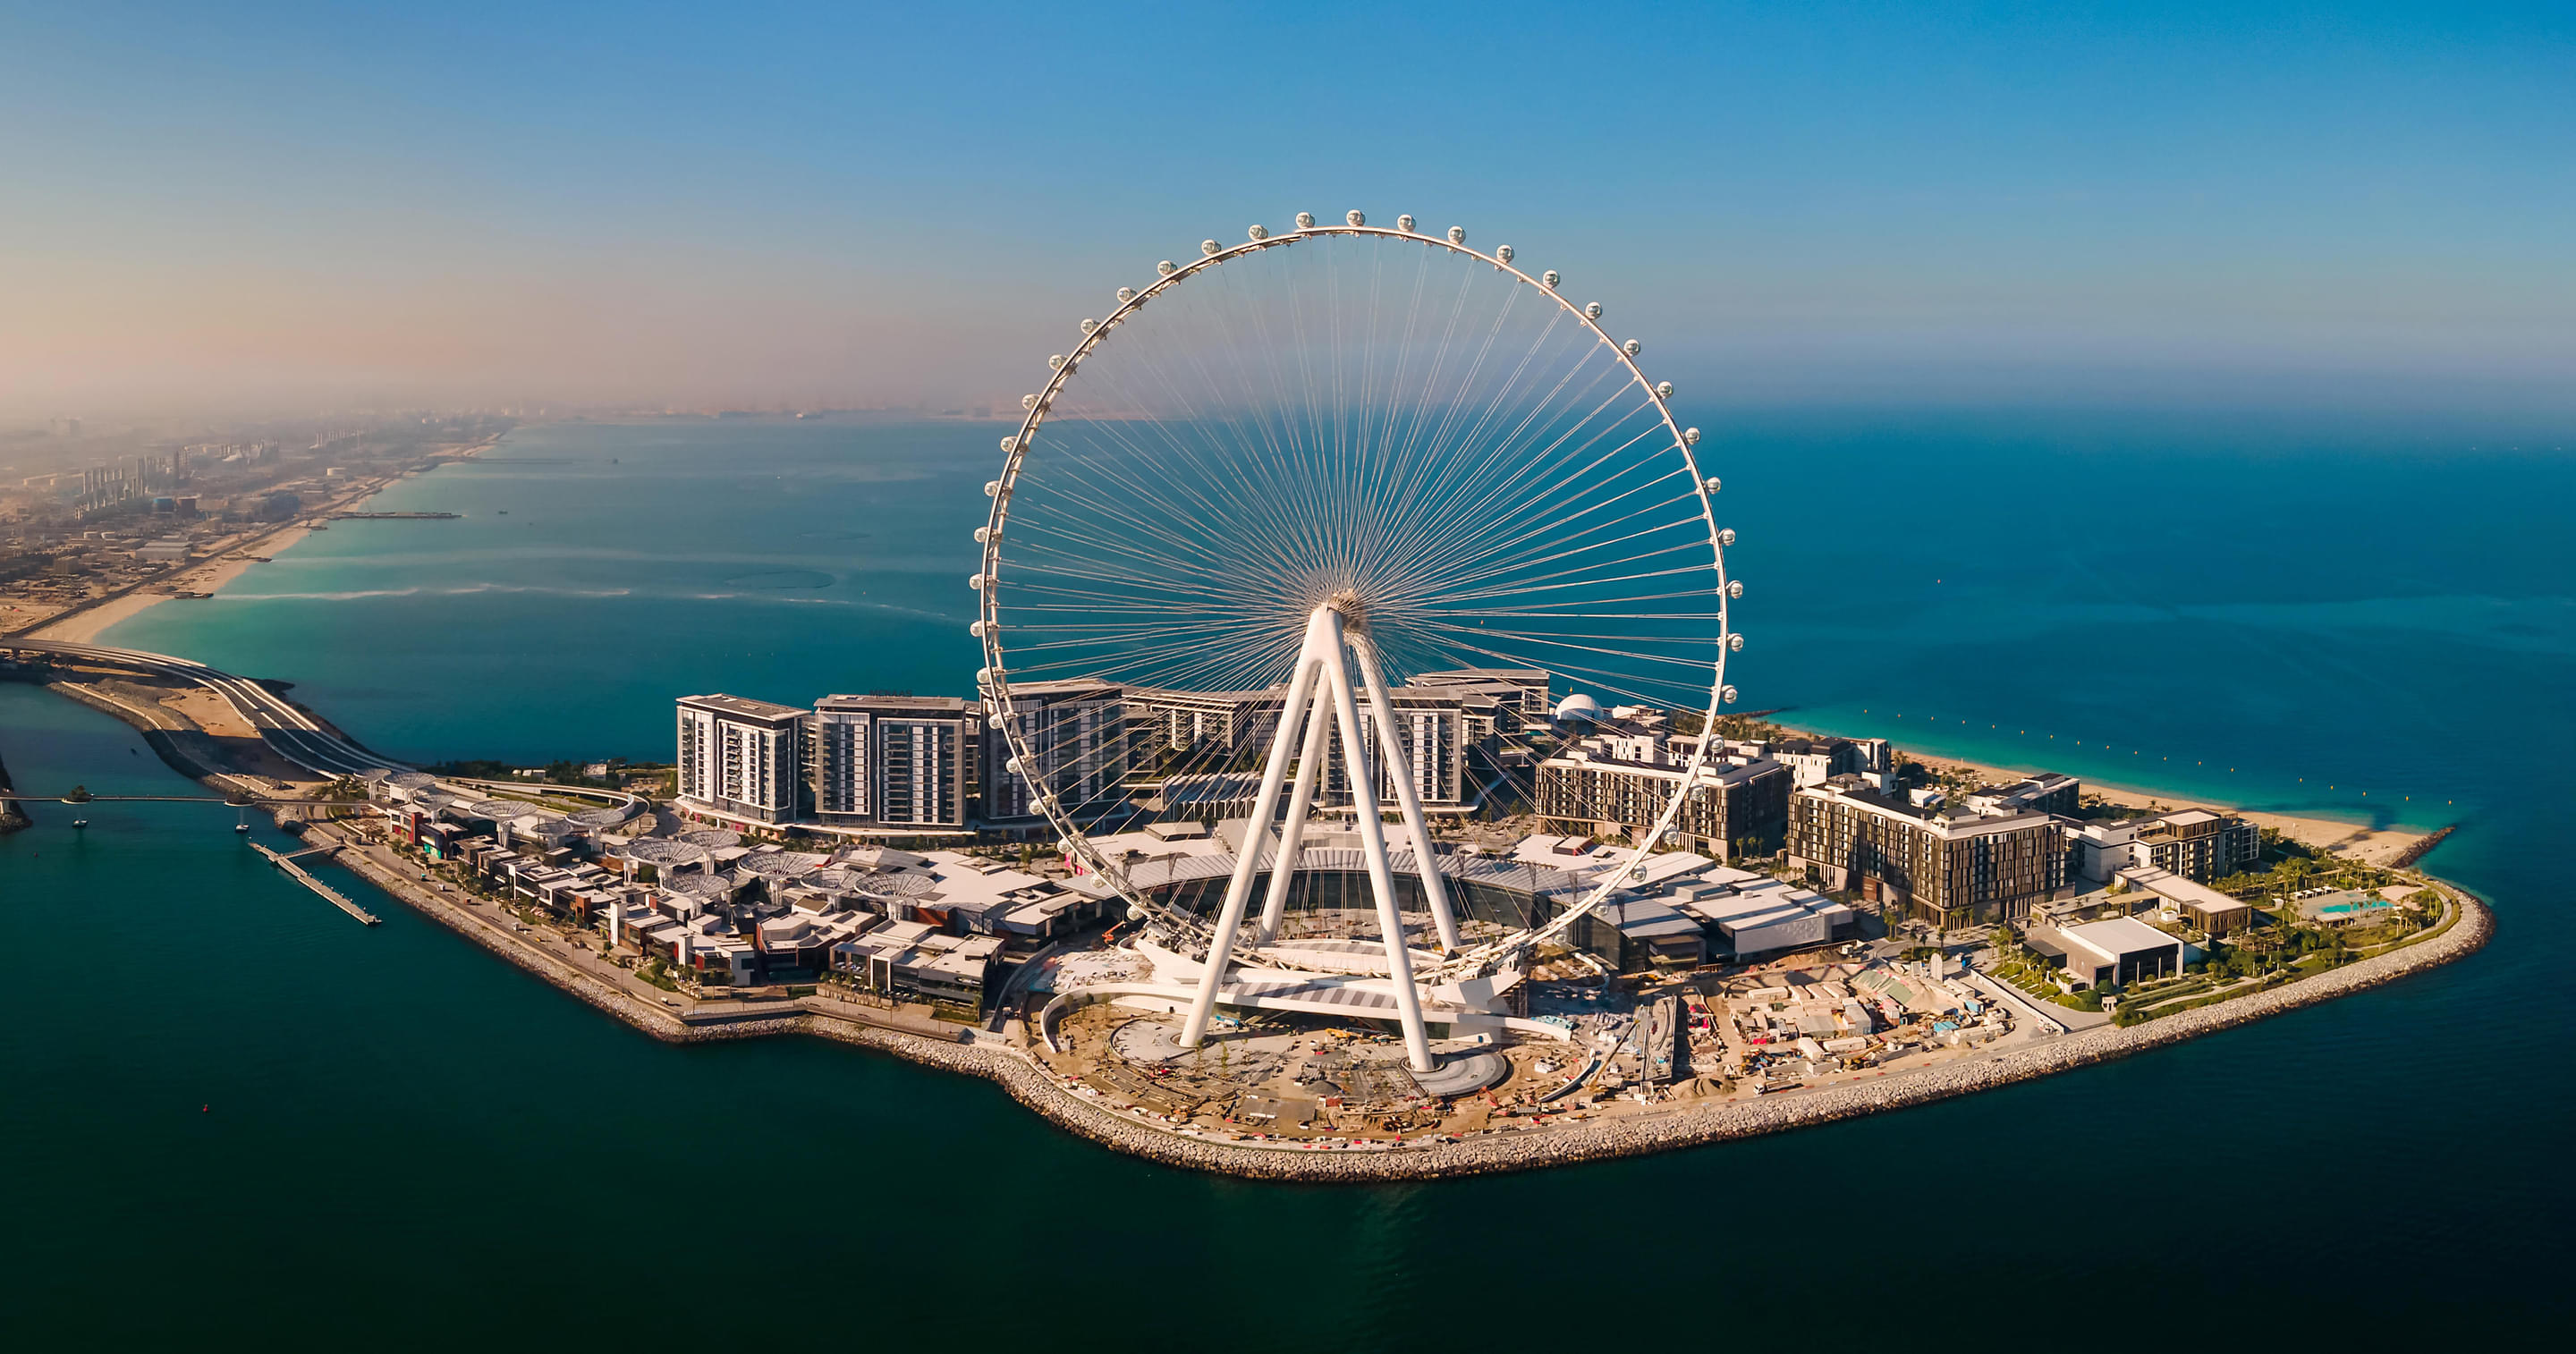 Must Things to Do in Dubai